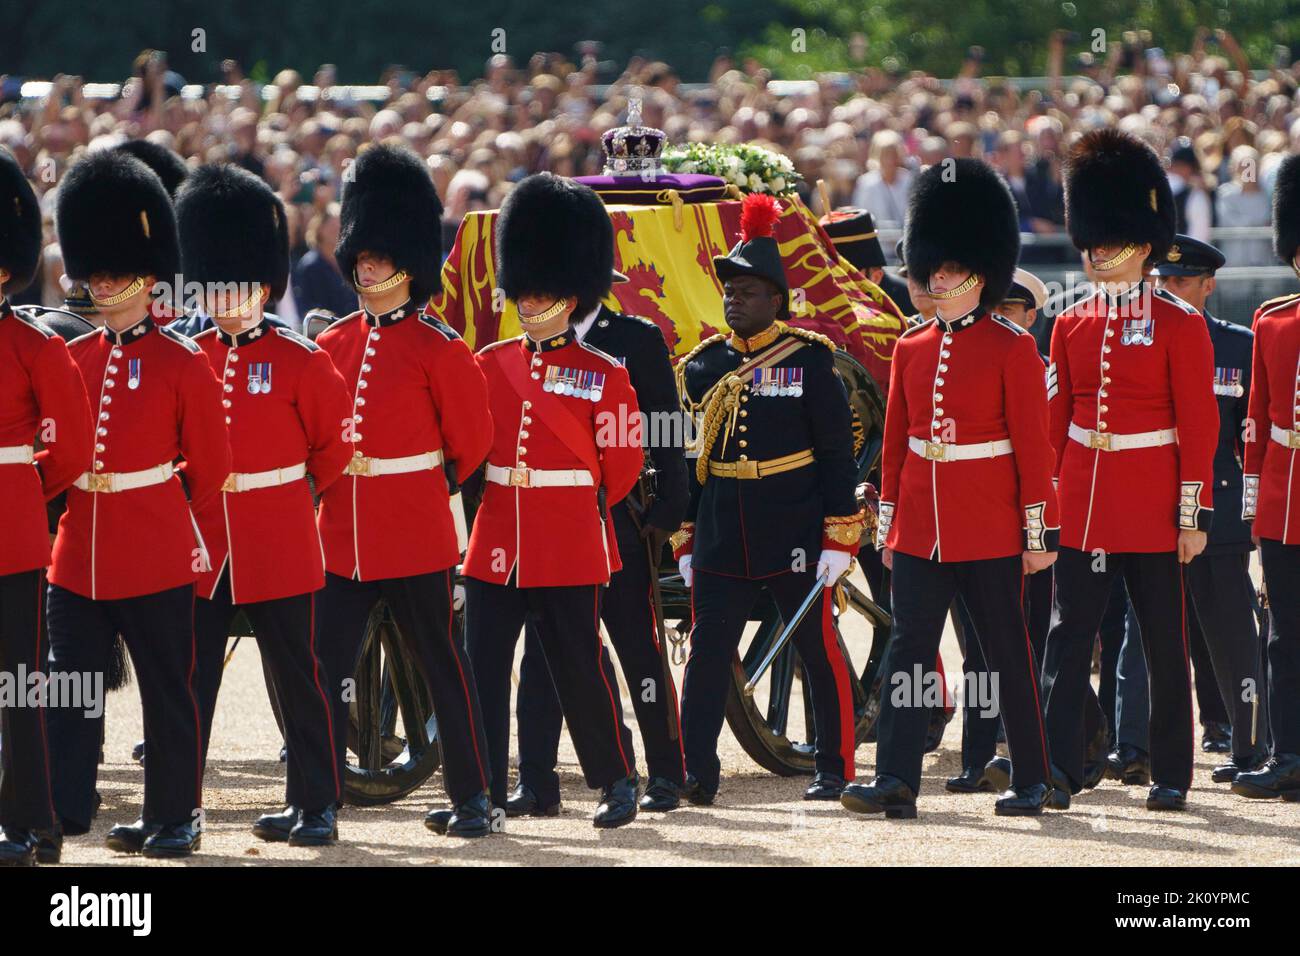 LONDON - SEPTEMBER 14: The procession of Queen Elizabeth II's coffin passes across Horse Guards Parade, travelling from Buckingham Palace to Westminster Hall. Walking behind the coffin are Prince's William and Harry, Prince Edward, Prince Andrew, Princess Anne, along with King Charles III, as it is carried on a gun carriage, followed by other members of the Royal Family, on September 14, 2022. Credit: David Levenson/Alamy Live News Stock Photo